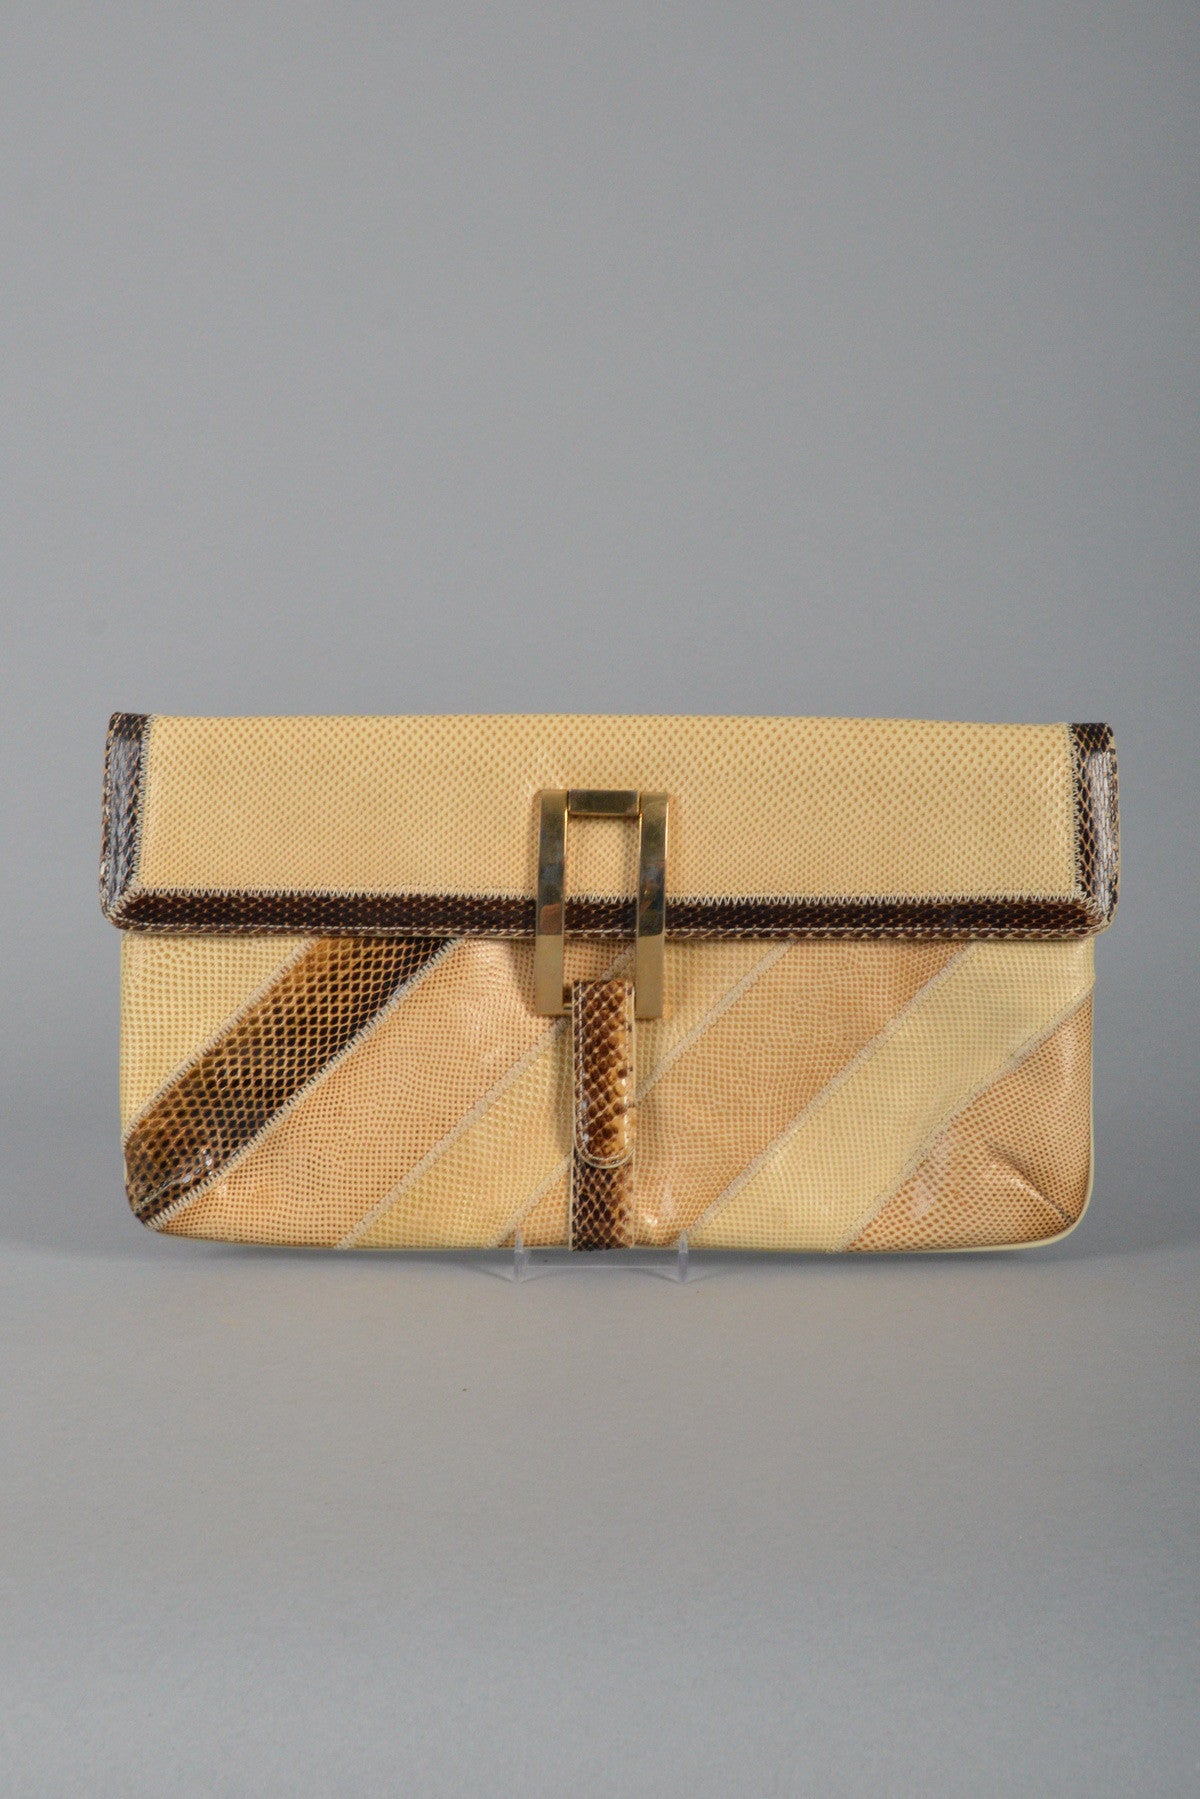 Varon 1980s Natural Snakeskin Striped Clutch with Buckle